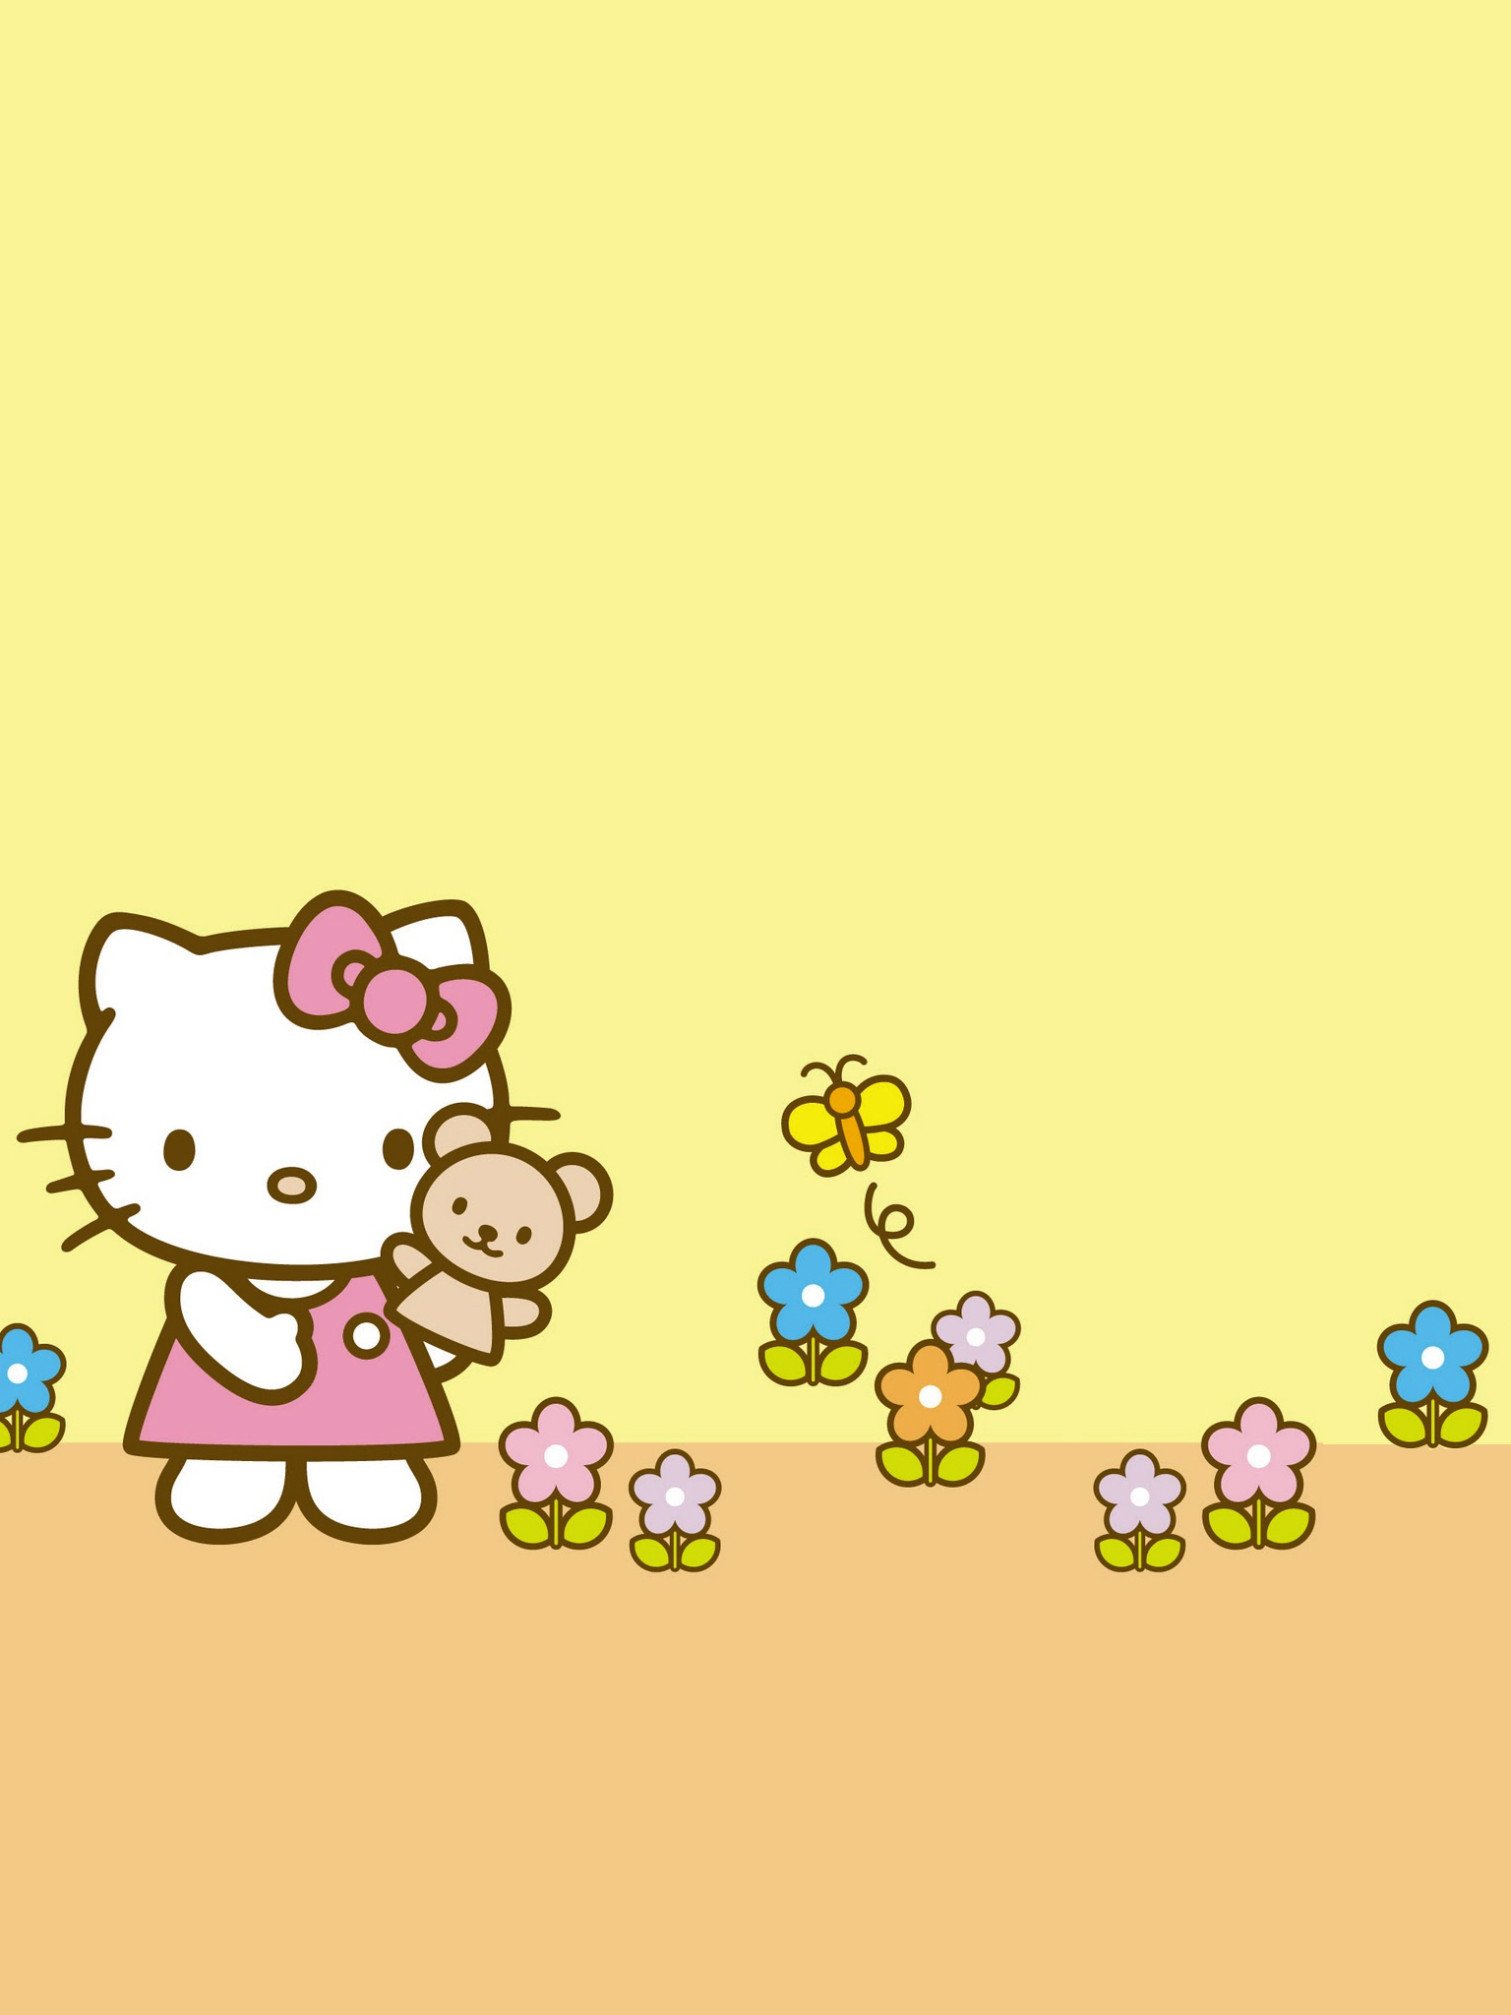  Be Positive   HELLO KITTY TABLETIPAD WALLPAPERS